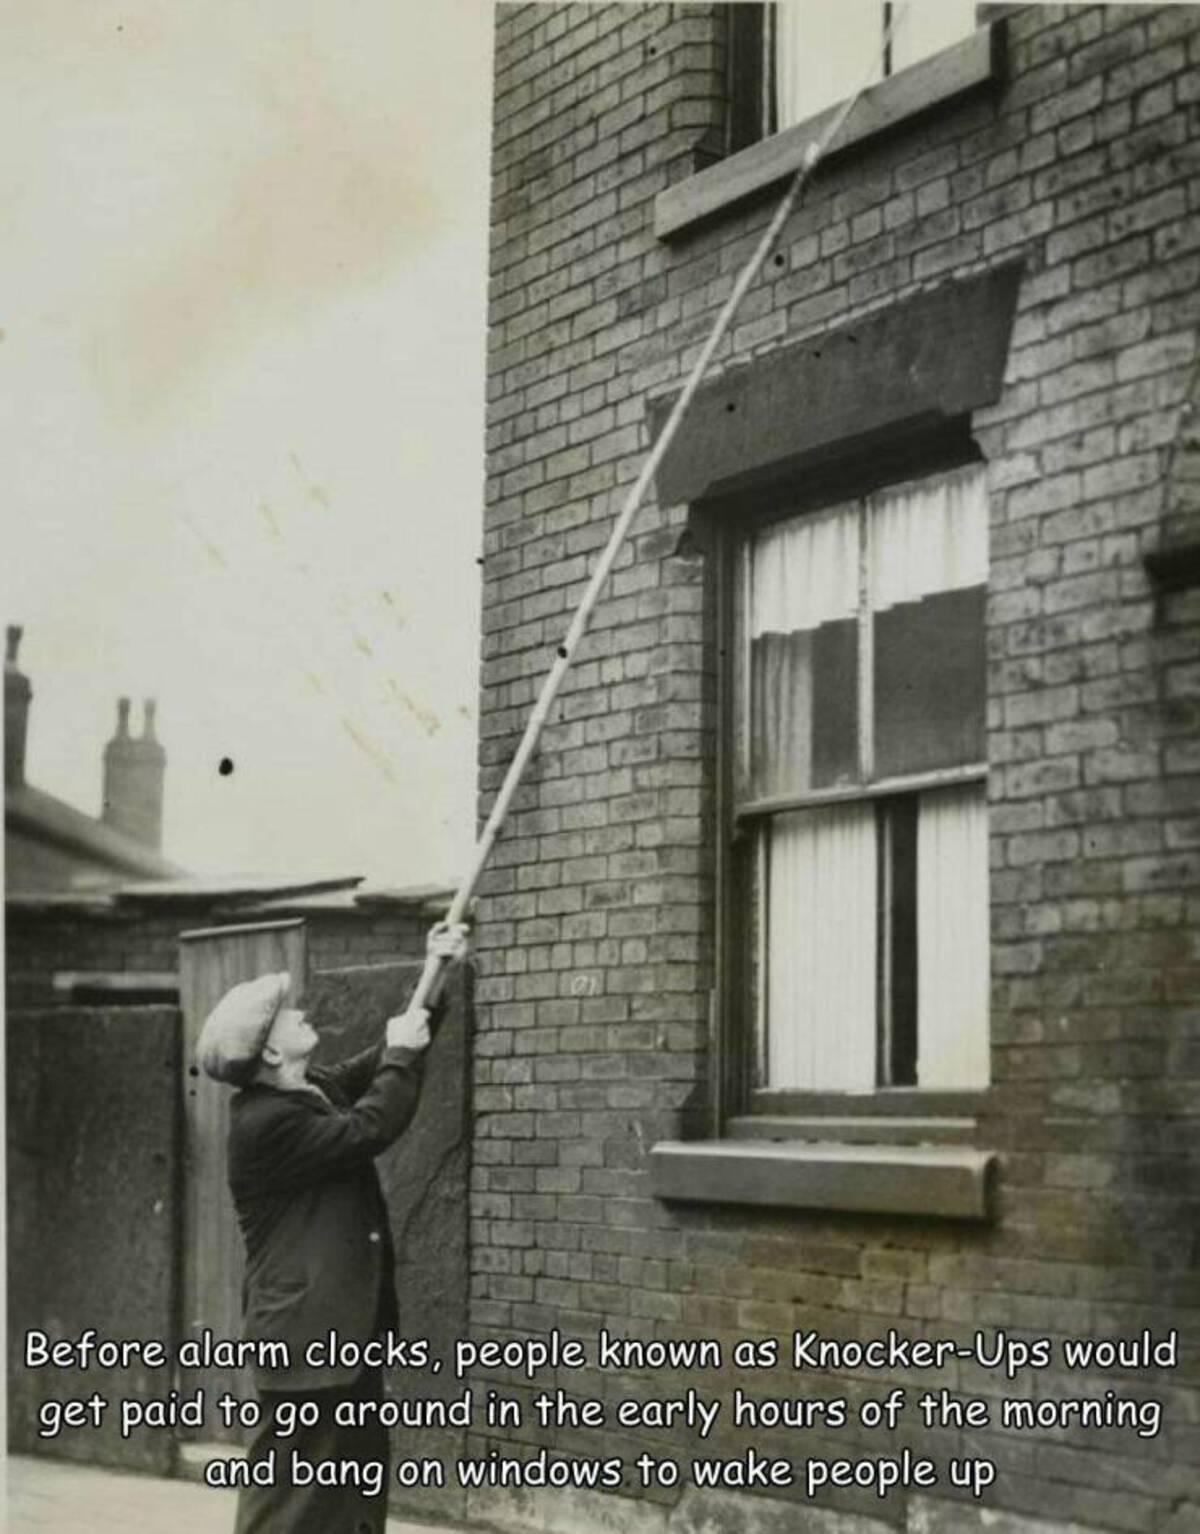 knocker upper - Before alarm clocks, people known as KnockerUps would get paid to go around in the early hours of the morning and bang on windows to wake people up